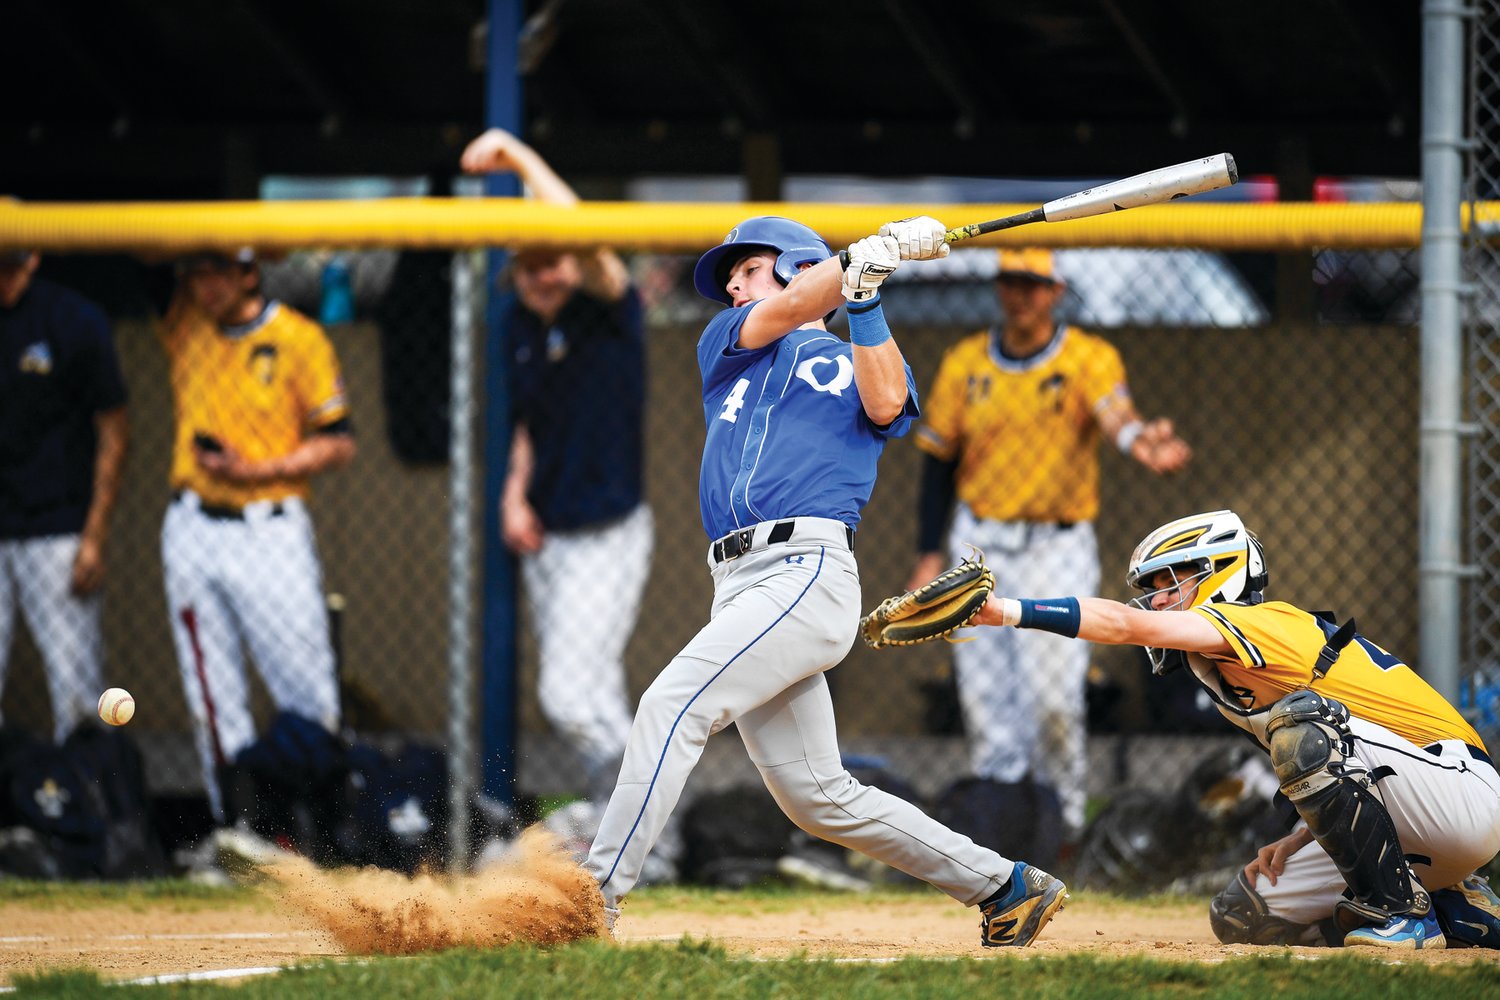 Quakertown’s Gunnar Rahn bounces a single for one of the Panthers’ five hits.